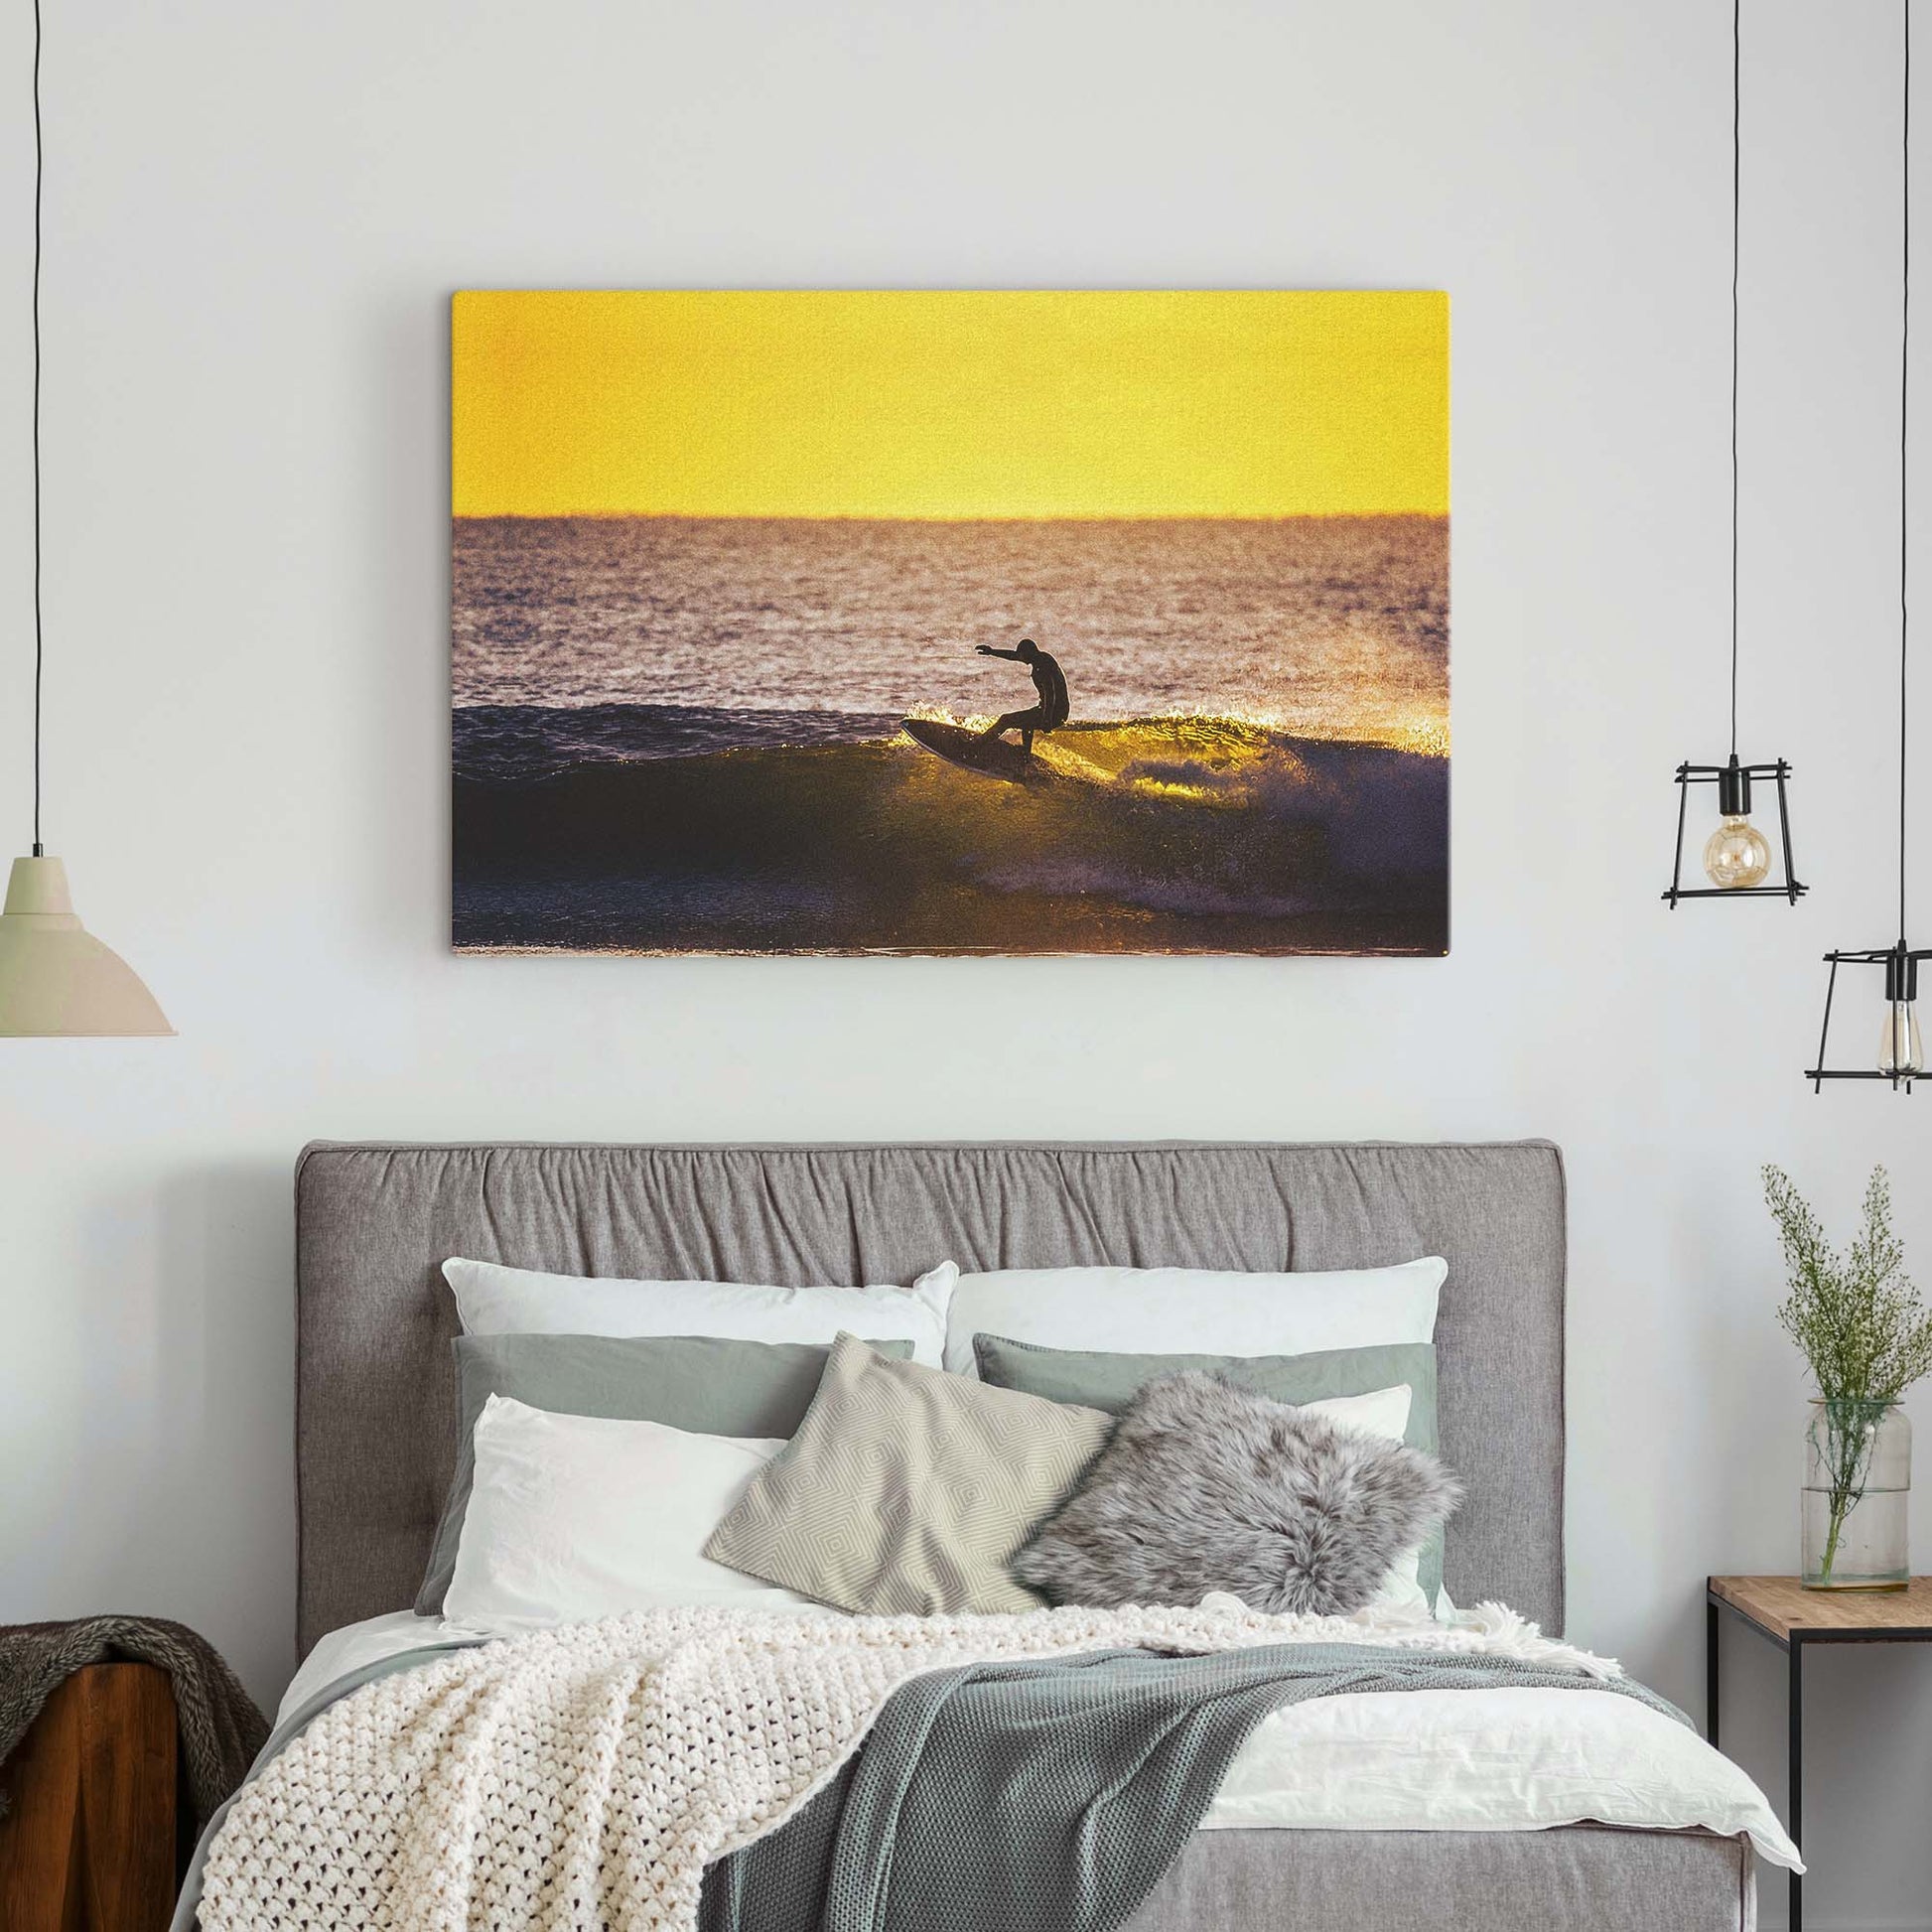 Surfing Silhouette Canvas Wall Art Style 1 - Image by Tailored Canvases